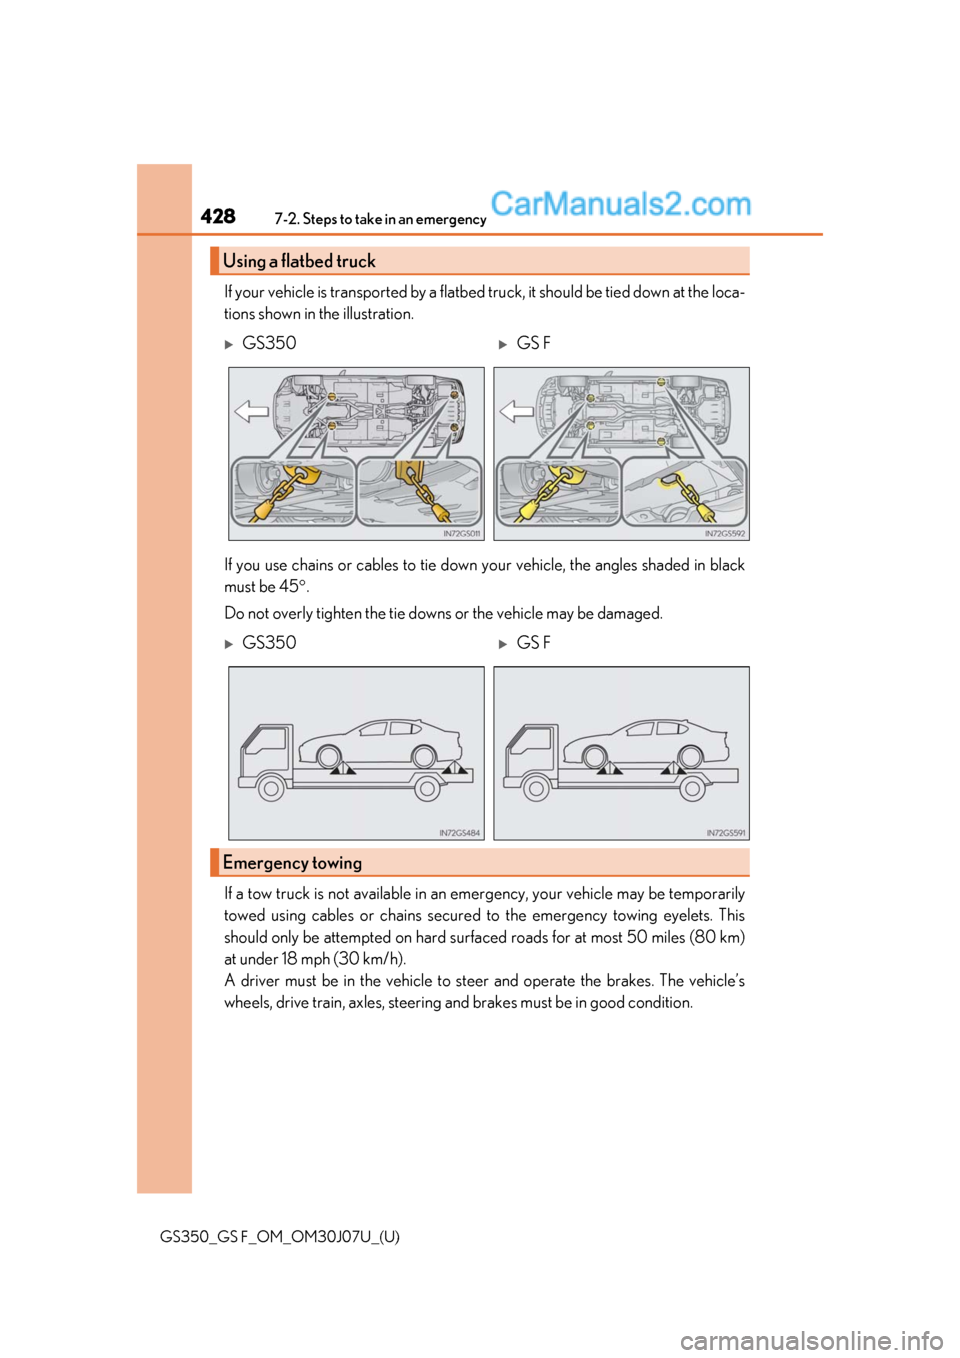 Lexus GS350 2020 Repair Manual 4287-2. Steps to take in an emergency
GS350_GS F_OM_OM30J07U_(U)
If your vehicle is transported by a flatbed truck, it should be tied down at the loca-
tions shown in the illustration.
If you use chai